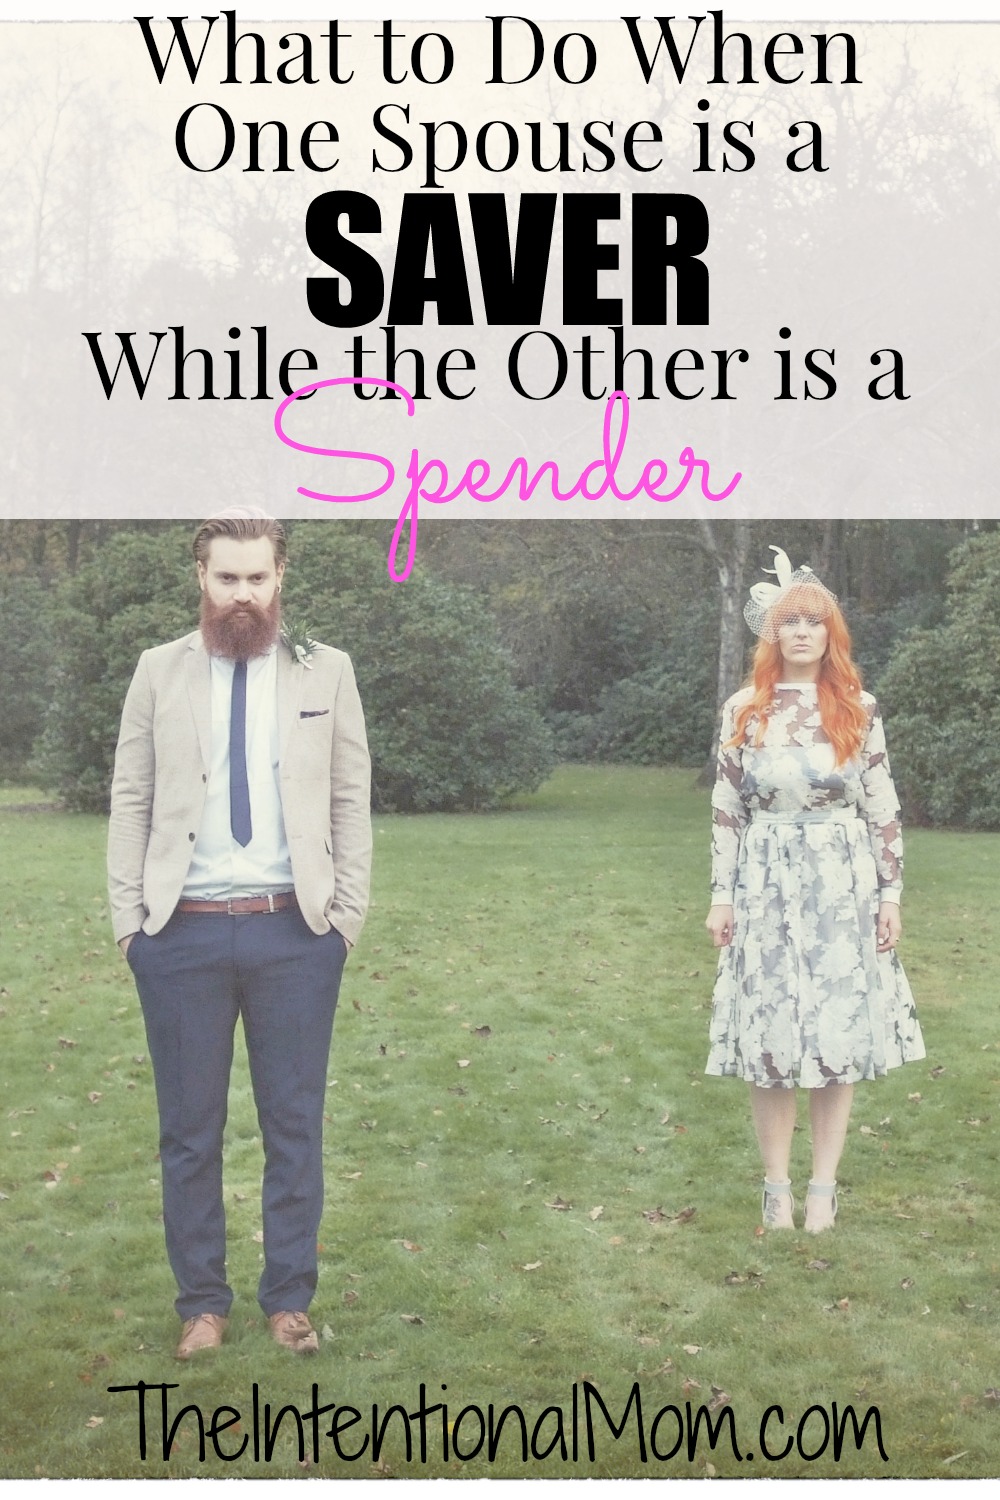 What to Do When One Spouse is a Spender While the Other is a Saver